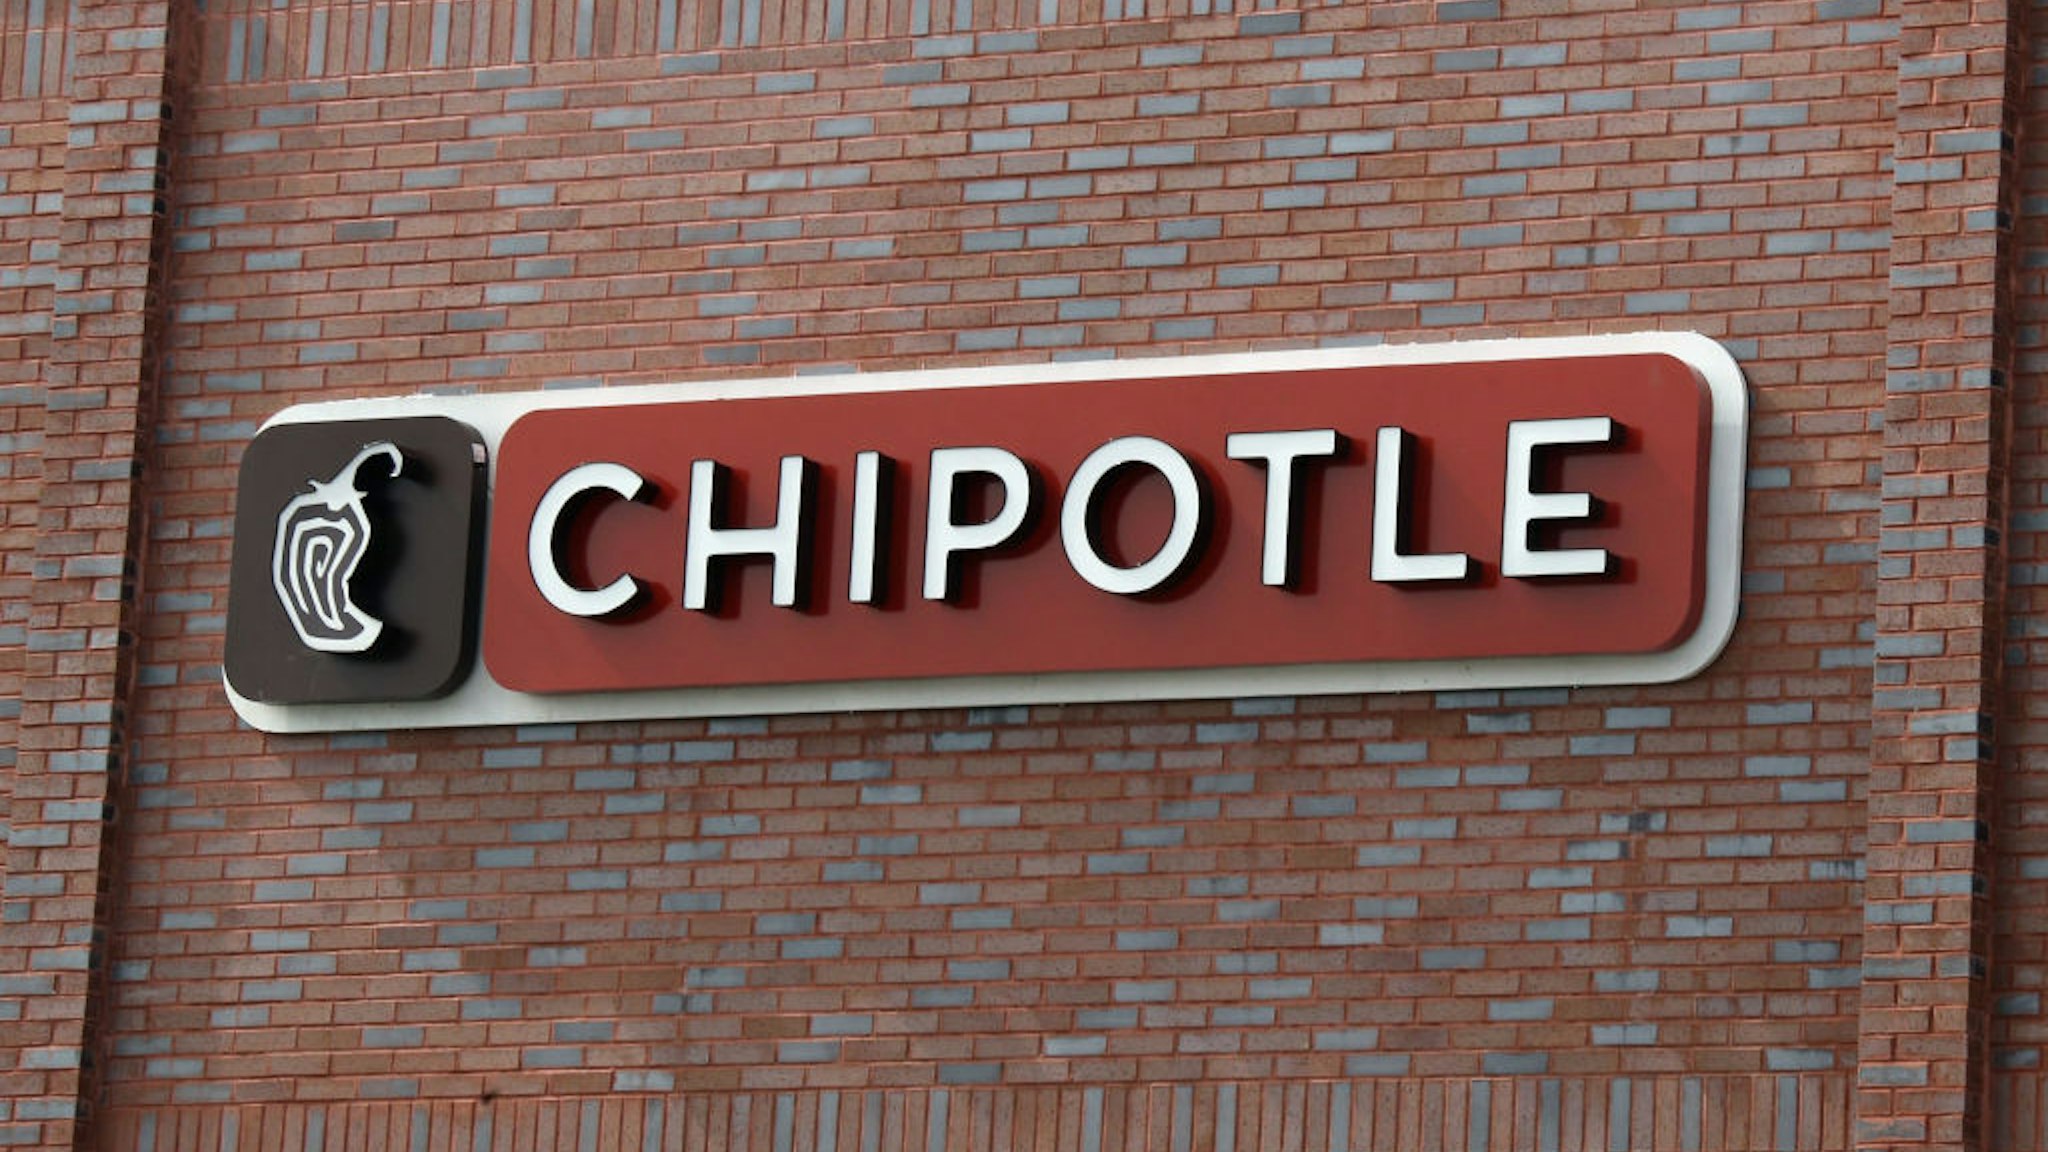 An image of the sign for Chipotle as photographed on March 16, 2020 in Wantagh, New York.